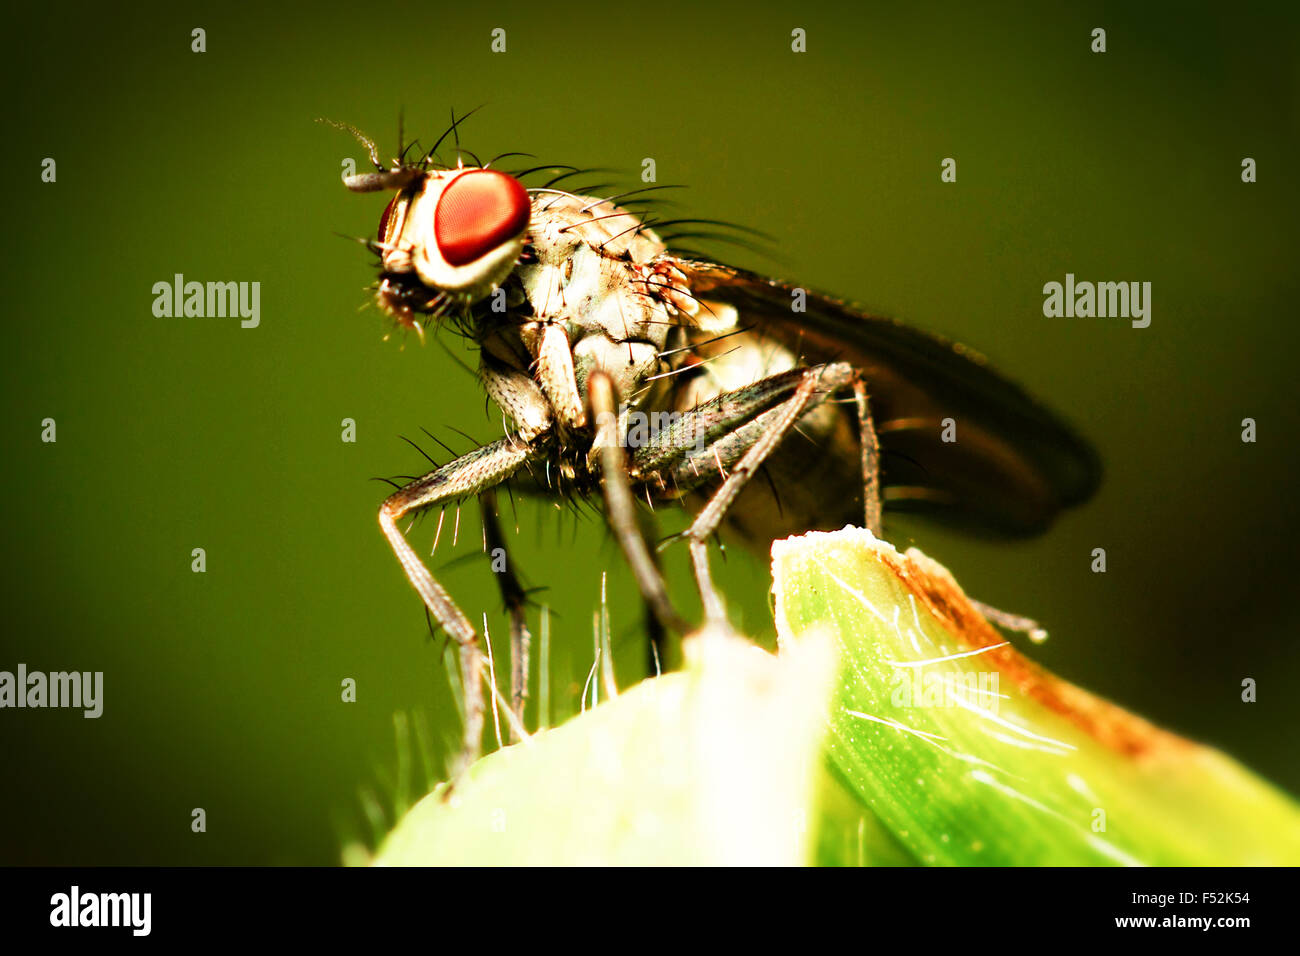 True Flies Are Insects Of The Order Diptera They Poses A Single Pare Of Wing Stock Photo